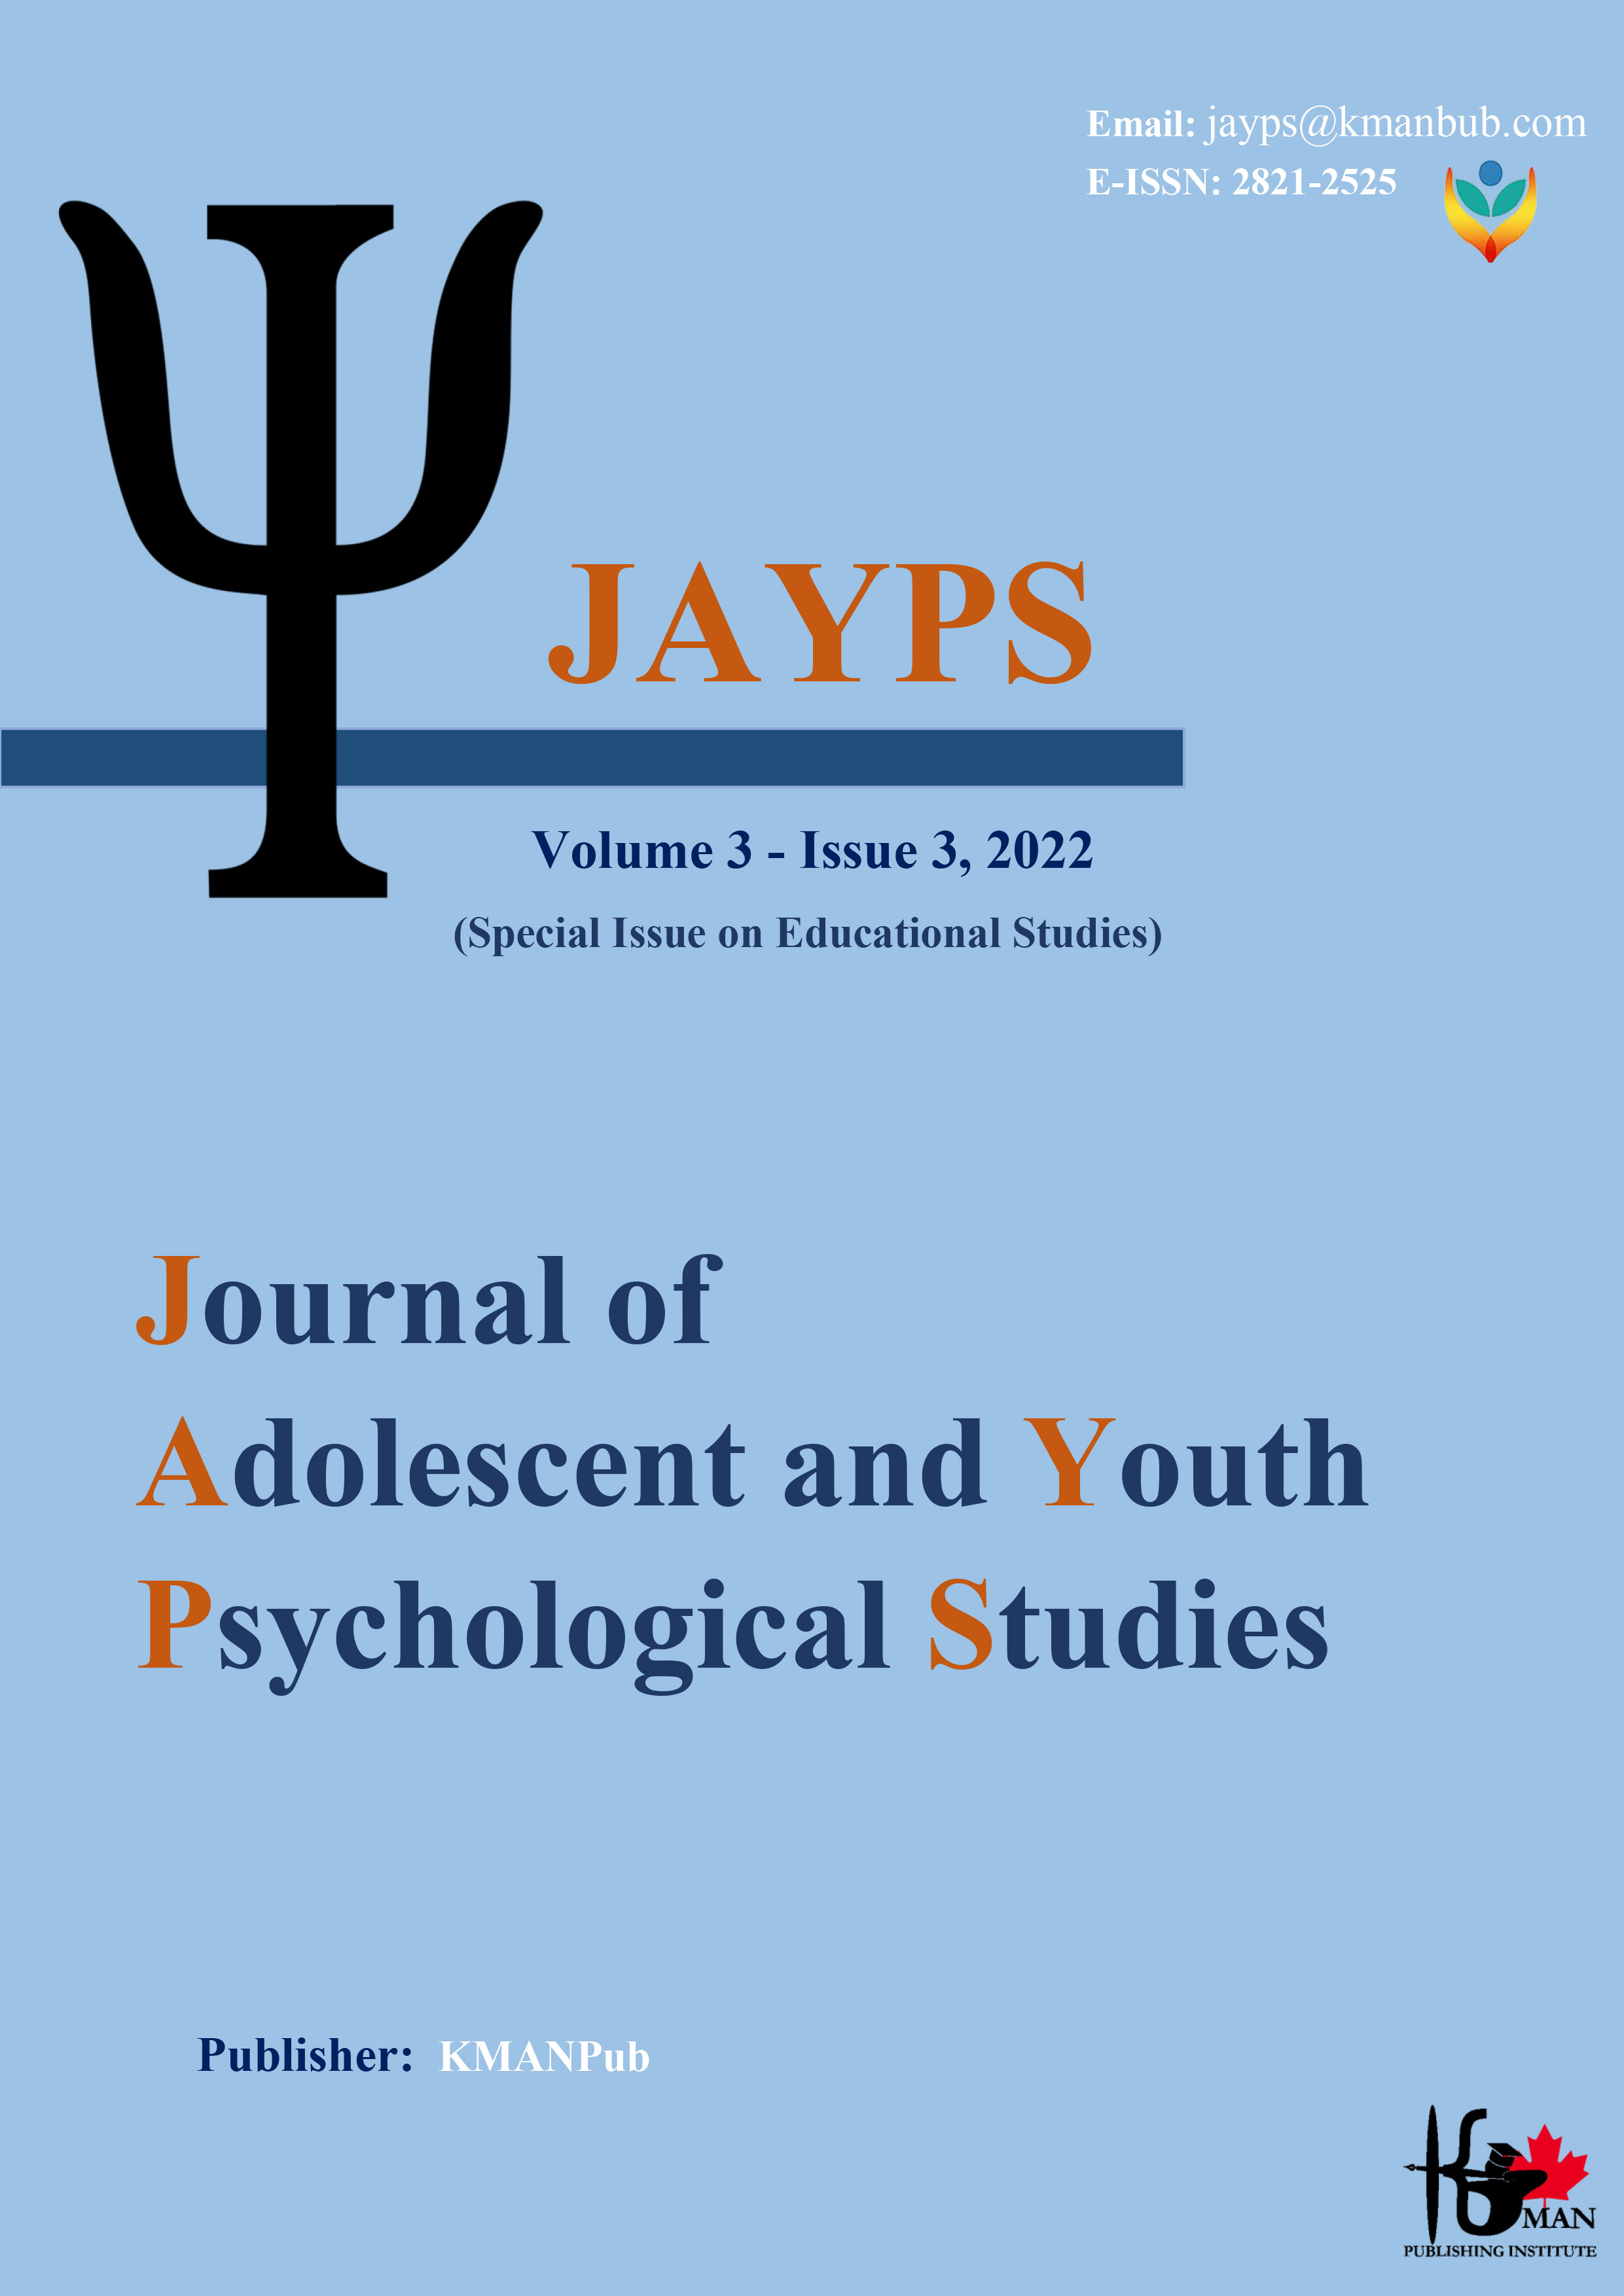 					View Vol. 3 No. 3 (2022): Serial Number 6 (Special Issue on Educational Studies)
				